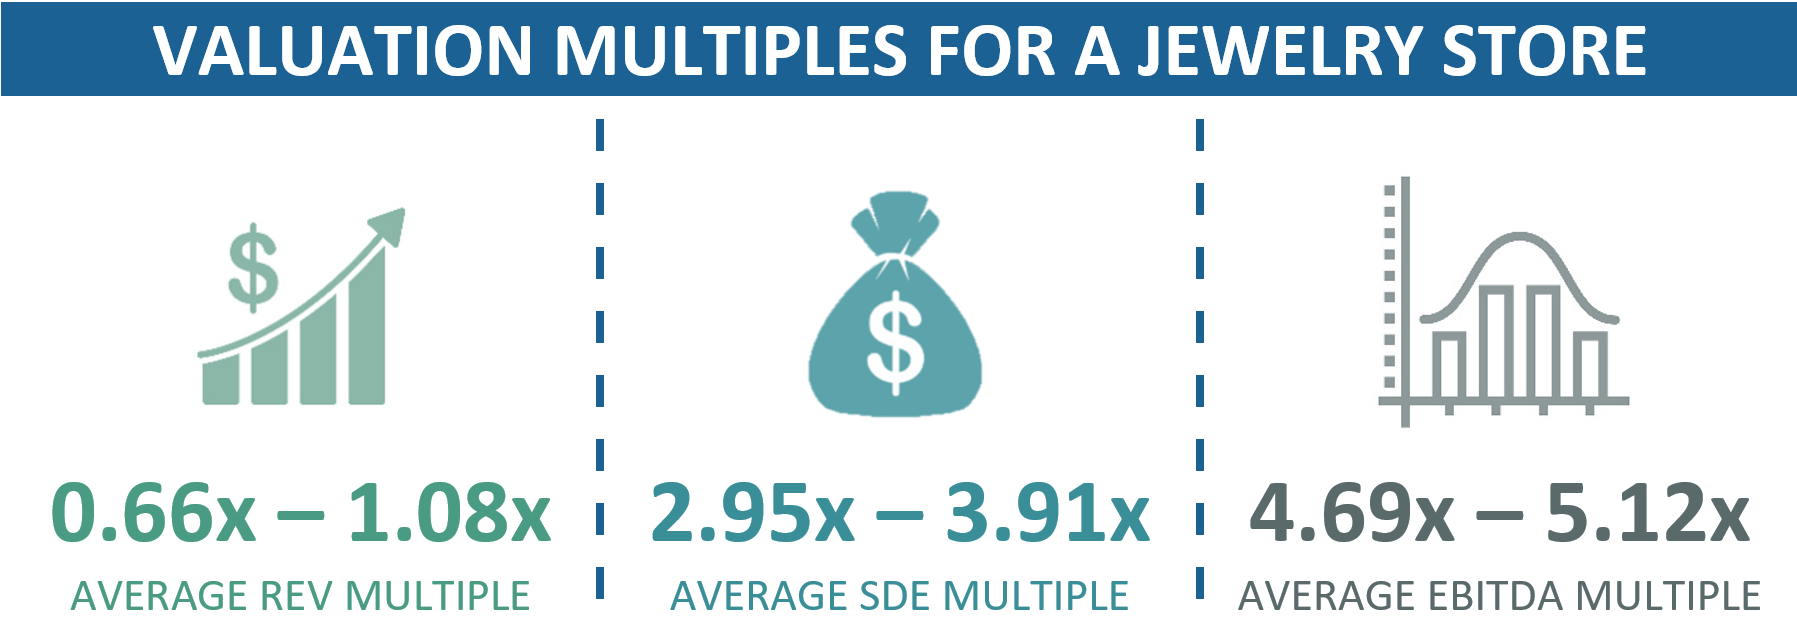 Valuation Multiples For A Jewelry Store